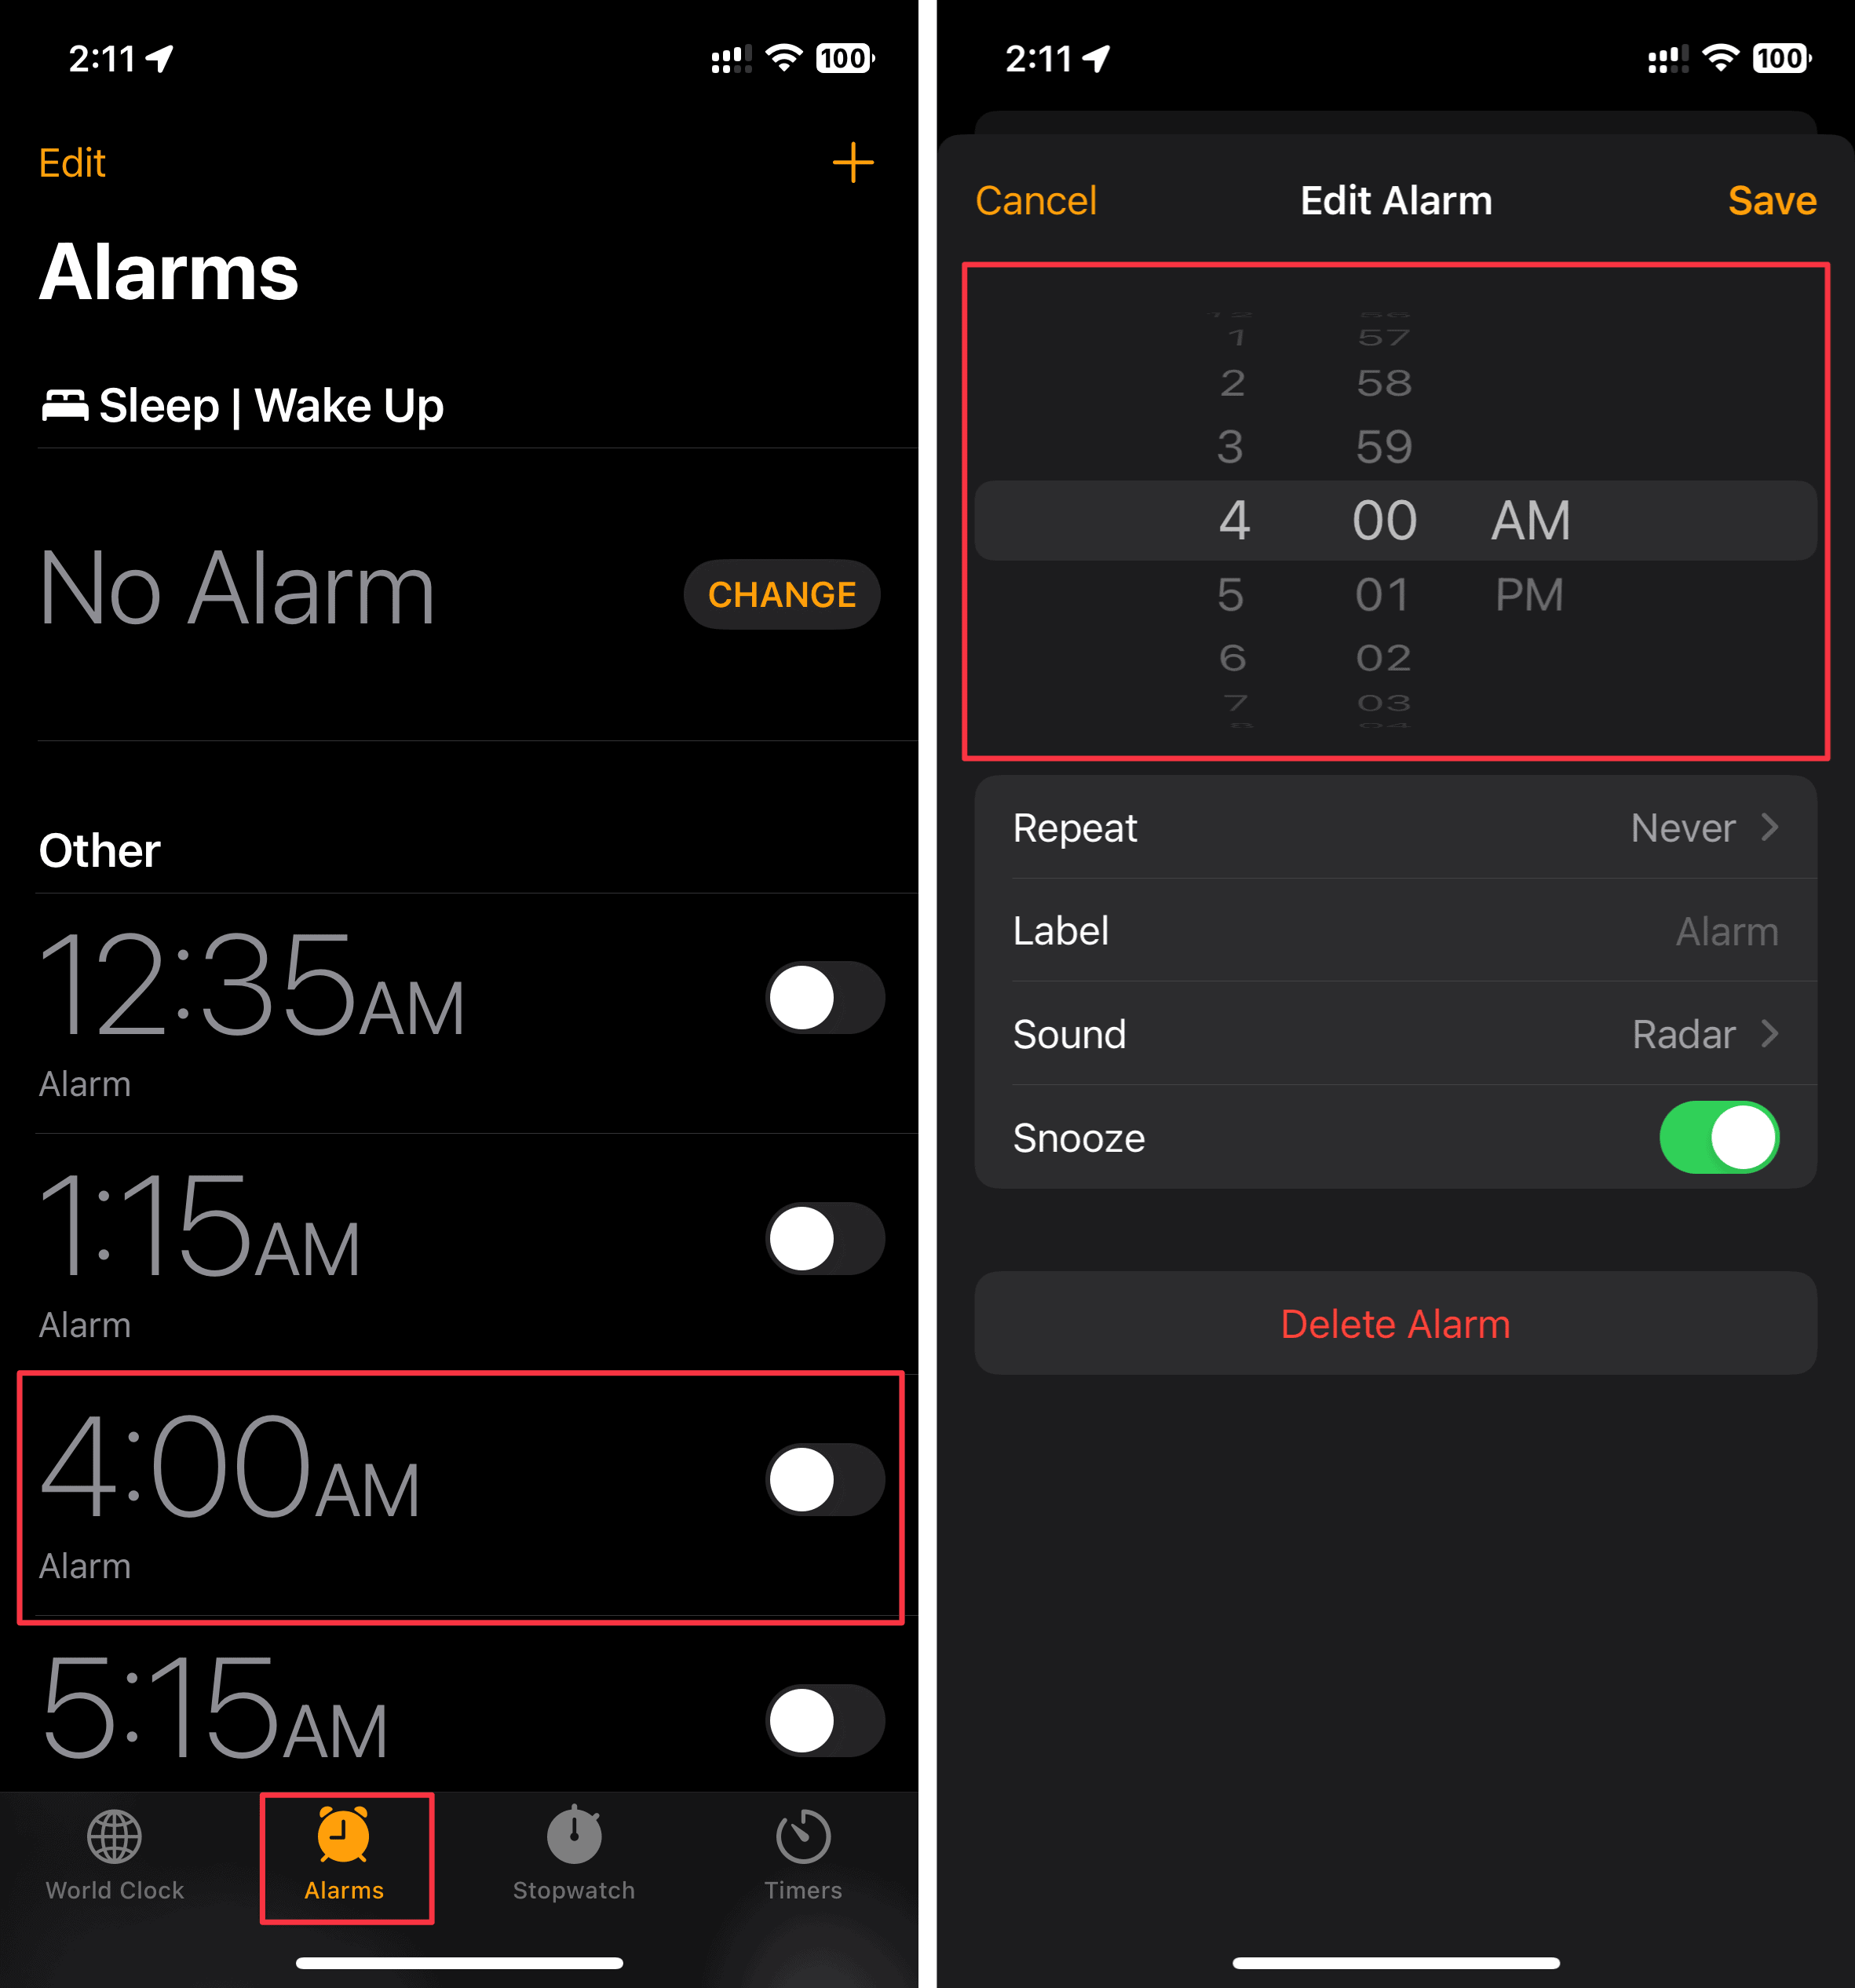 Adjusting the Alarm time in the Clock app